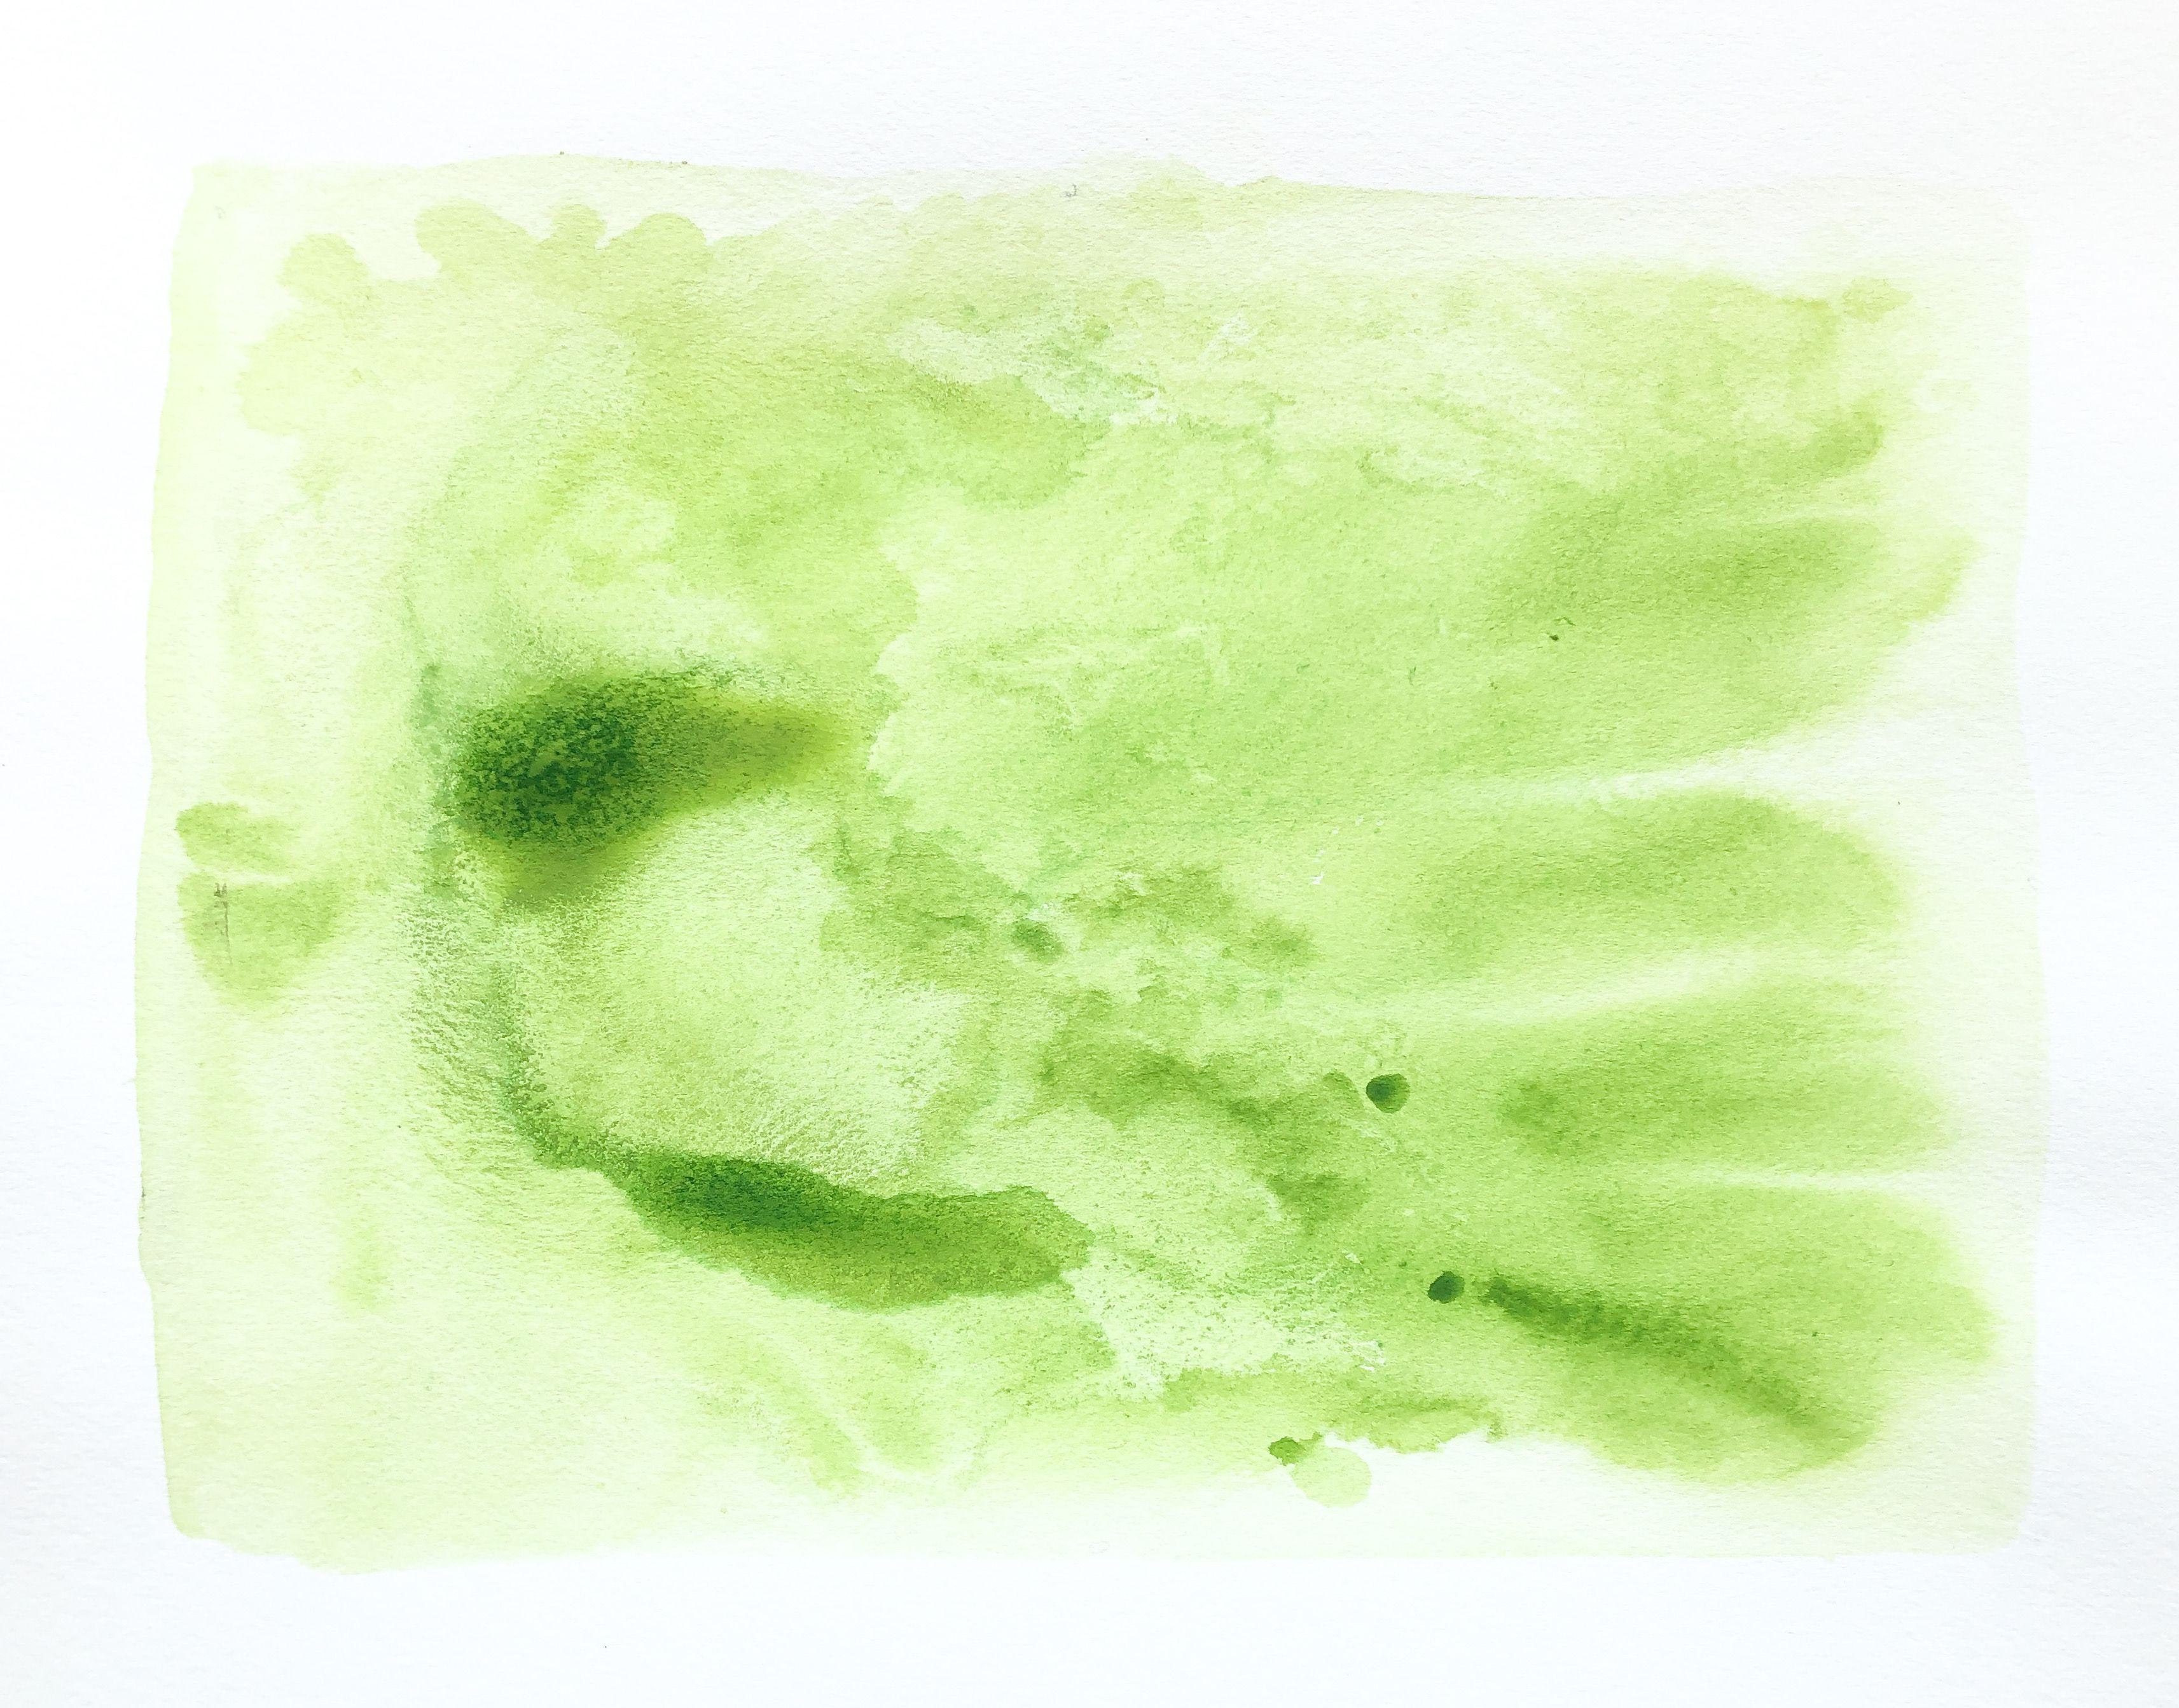 Vivid and luscious plumes of emerald green pigment splayed across heavy watercolor bond. It was created with salt water and acrylics. the combination causes wonderful reactions, resulting in organic branching of pigments. This piece is part of a